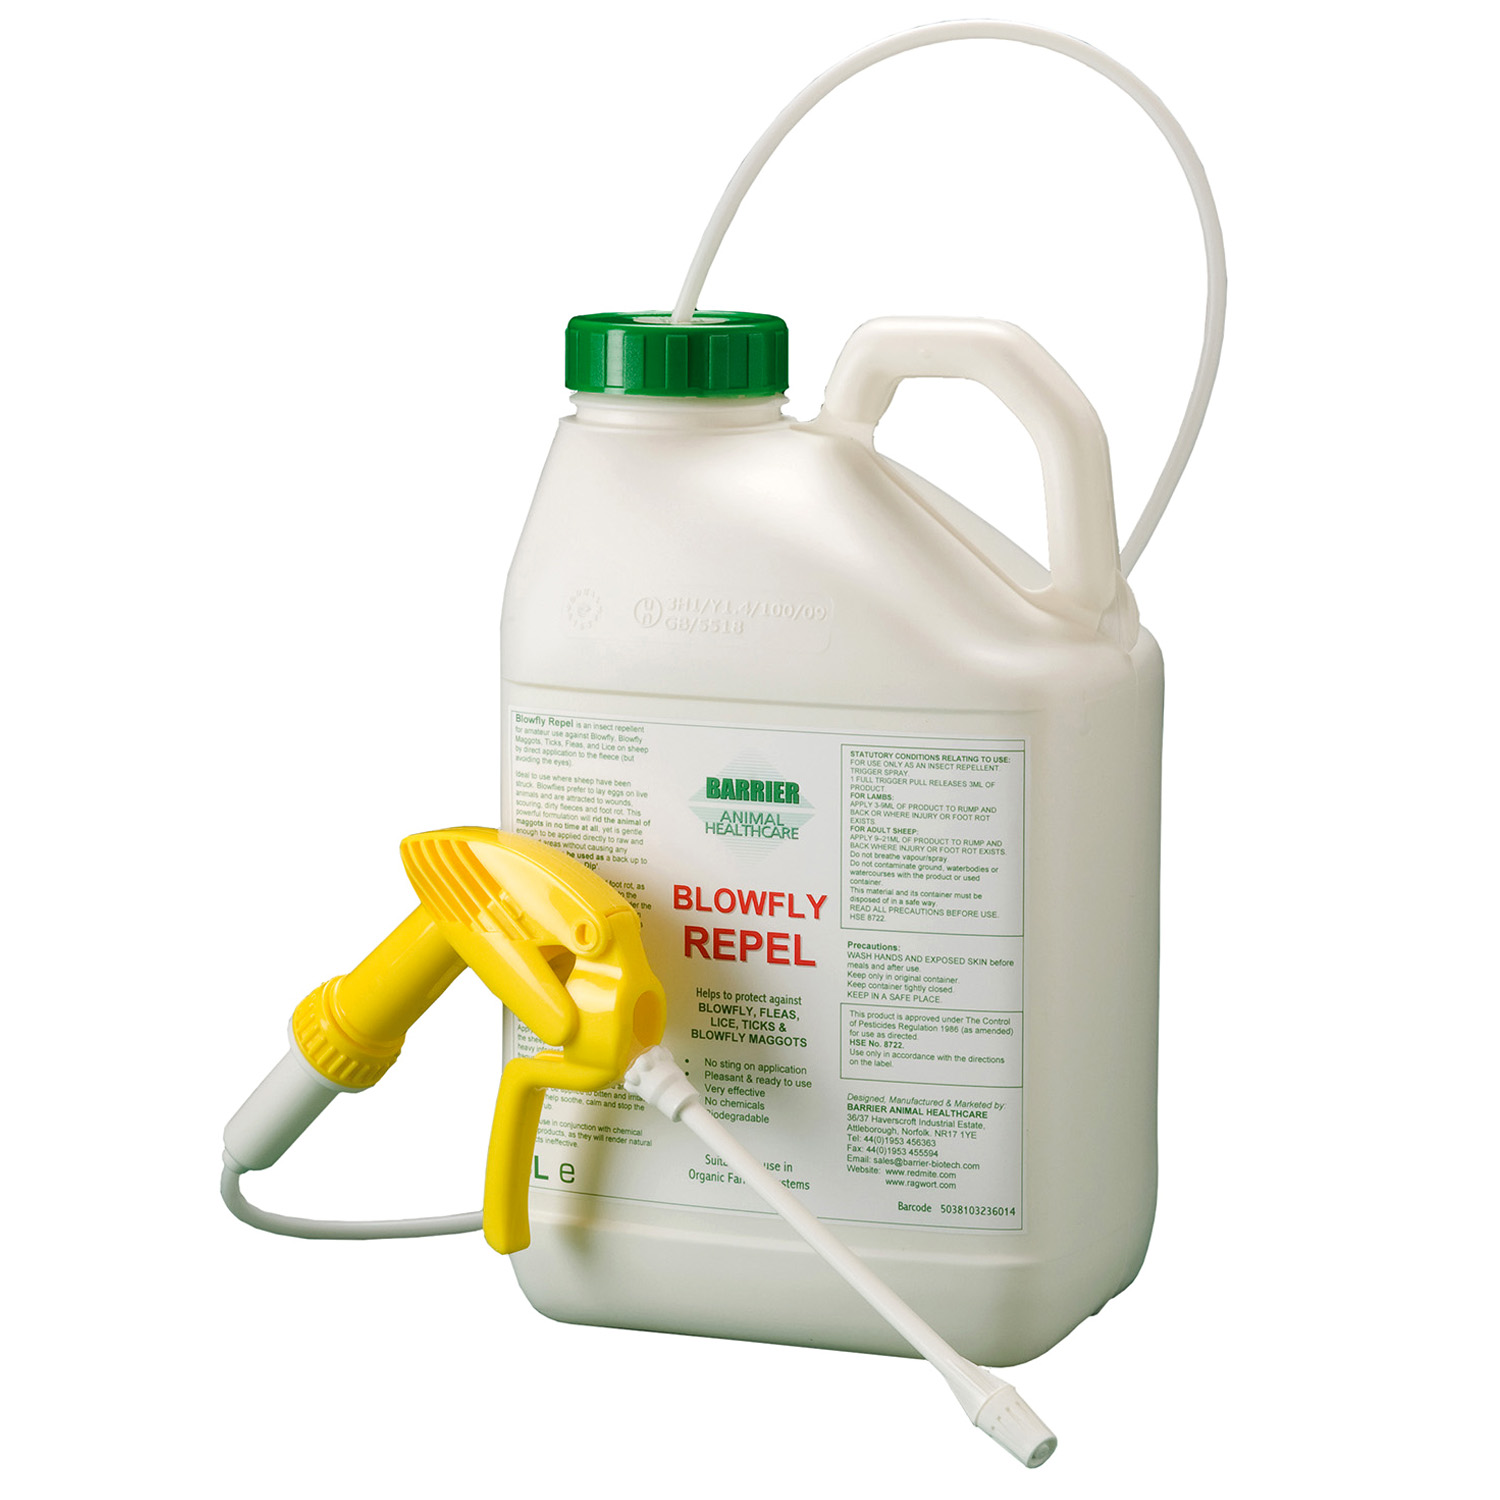 BARRIER BLOWFLY REPEL FOR SHEEP BARRIER BLOWFLY REPEL FOR SHEEP 5 LT